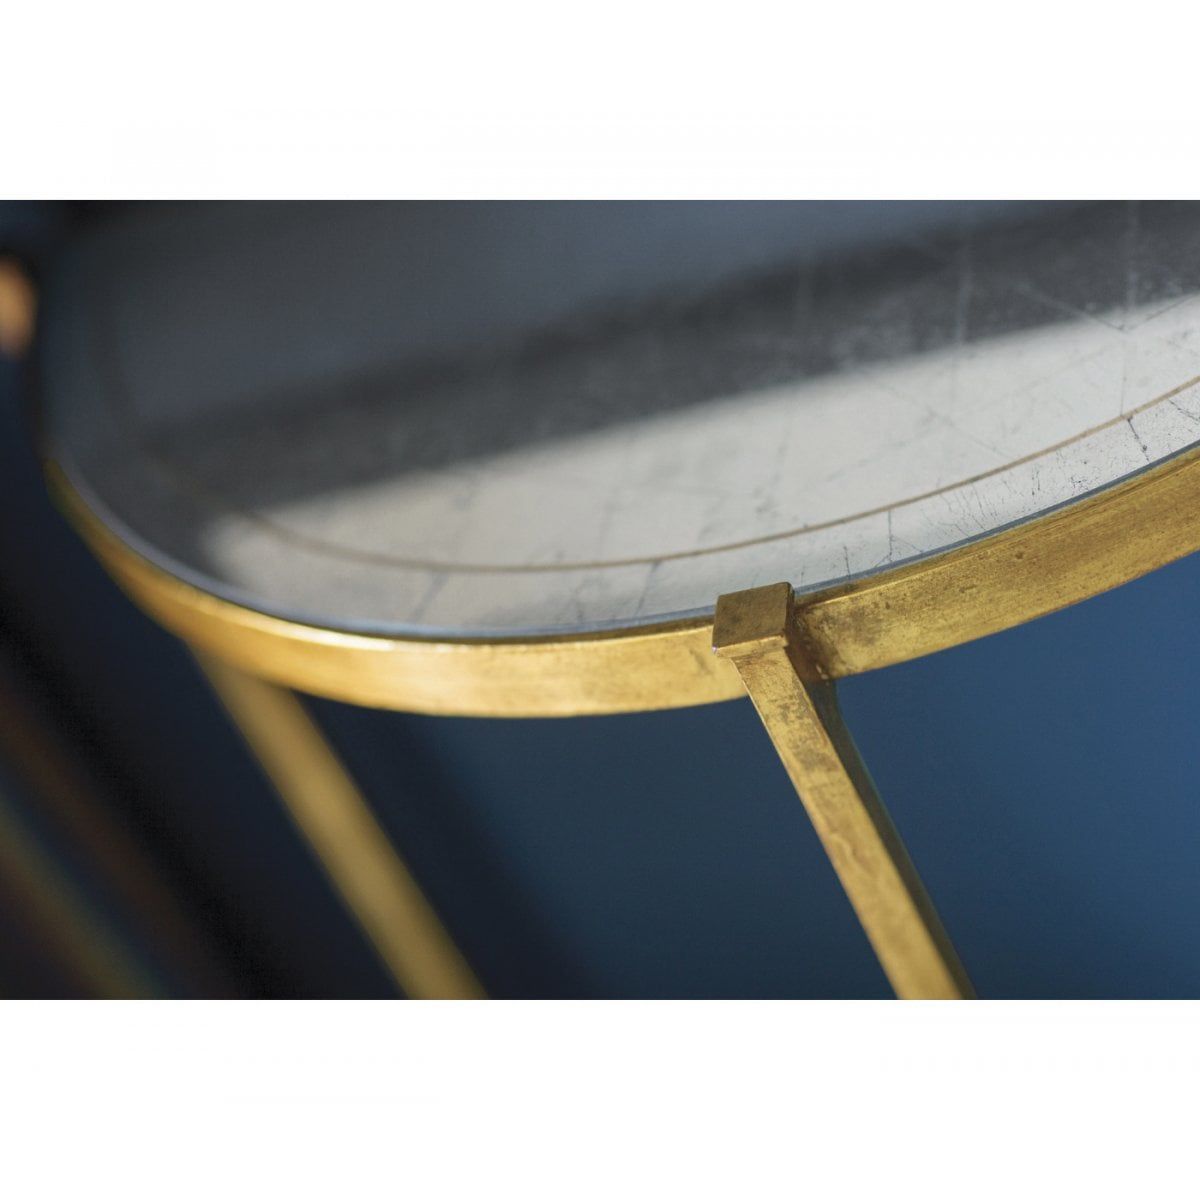 Luxury Designer Small Glass Gold Console Table | Swanky Interiors Regarding Glass And Gold Console Tables (View 13 of 20)